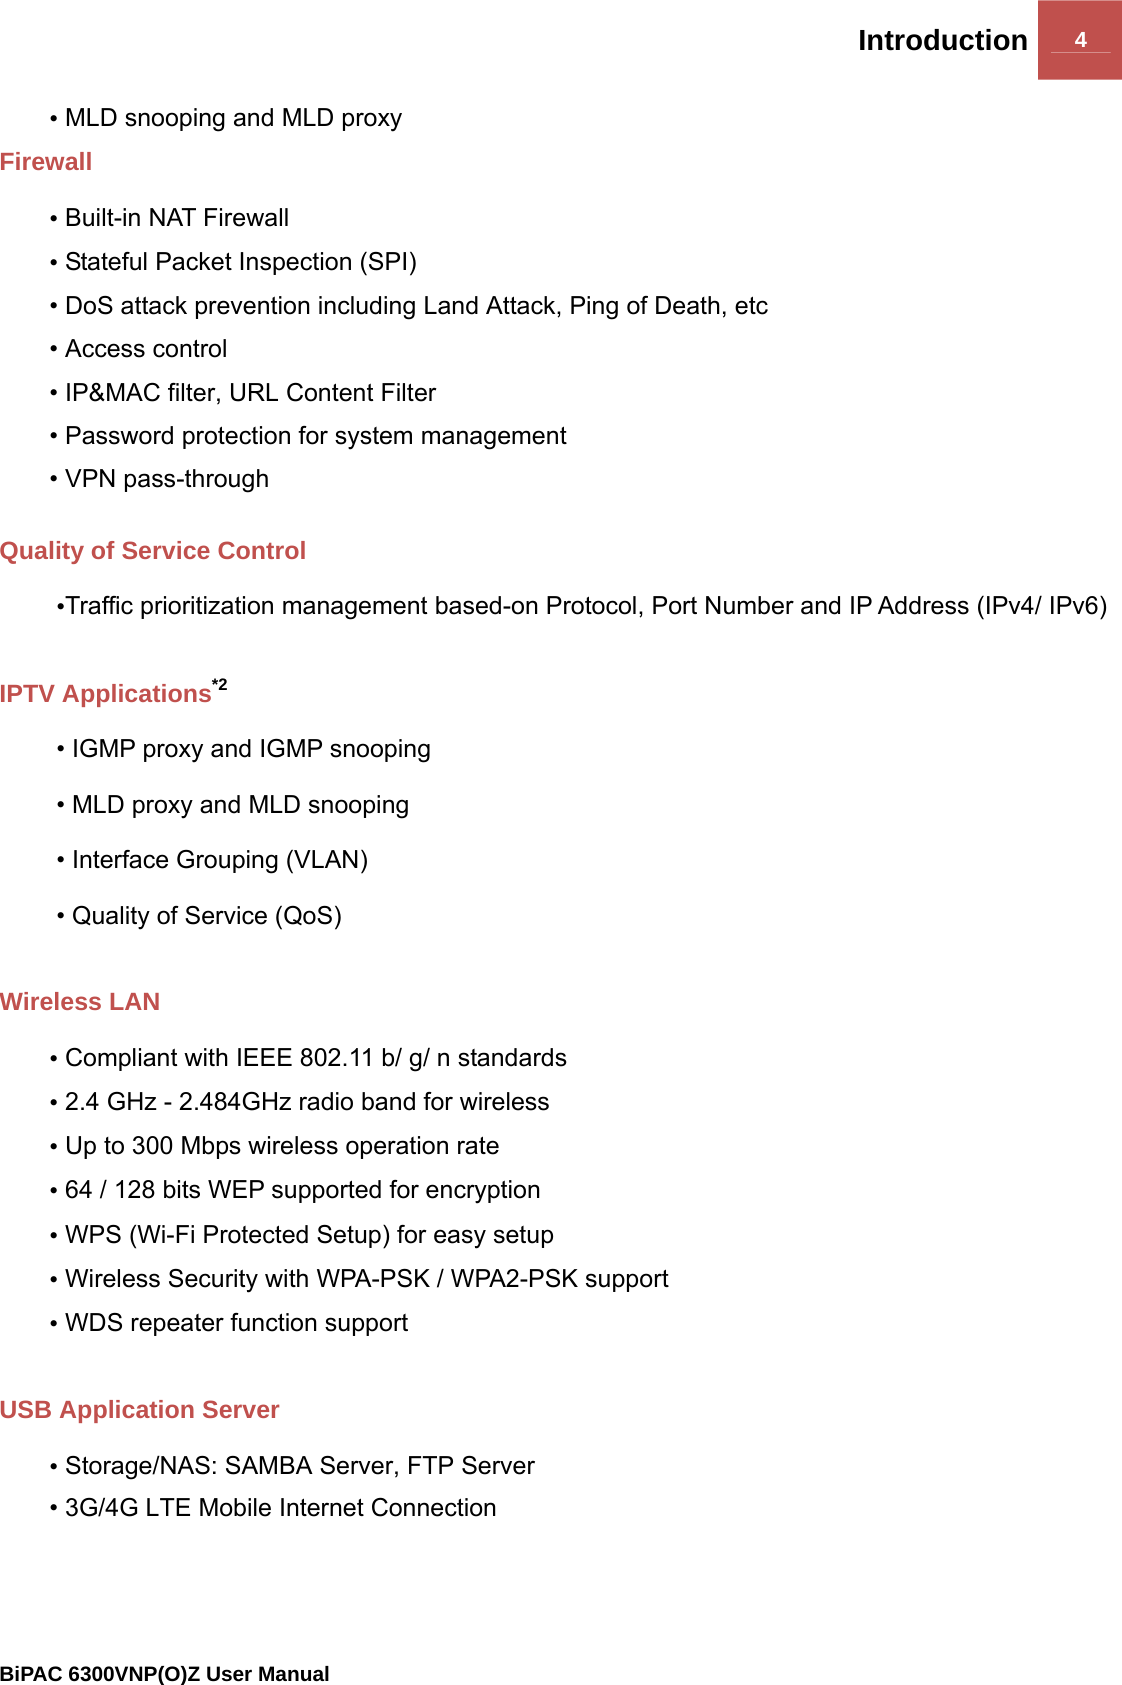 Introduction 4                                                BiPAC 6300VNP(O)Z User Manual  • MLD snooping and MLD proxy  Firewall • Built-in NAT Firewall • Stateful Packet Inspection (SPI) • DoS attack prevention including Land Attack, Ping of Death, etc • Access control • IP&amp;MAC filter, URL Content Filter  • Password protection for system management • VPN pass-through  Quality of Service Control •Traffic prioritization management based-on Protocol, Port Number and IP Address (IPv4/ IPv6)  IPTV Applications*2 • IGMP proxy and IGMP snooping • MLD proxy and MLD snooping • Interface Grouping (VLAN) • Quality of Service (QoS)  Wireless LAN  • Compliant with IEEE 802.11 b/ g/ n standards • 2.4 GHz - 2.484GHz radio band for wireless  • Up to 300 Mbps wireless operation rate • 64 / 128 bits WEP supported for encryption • WPS (Wi-Fi Protected Setup) for easy setup • Wireless Security with WPA-PSK / WPA2-PSK support • WDS repeater function support  USB Application Server • Storage/NAS: SAMBA Server, FTP Server • 3G/4G LTE Mobile Internet Connection   